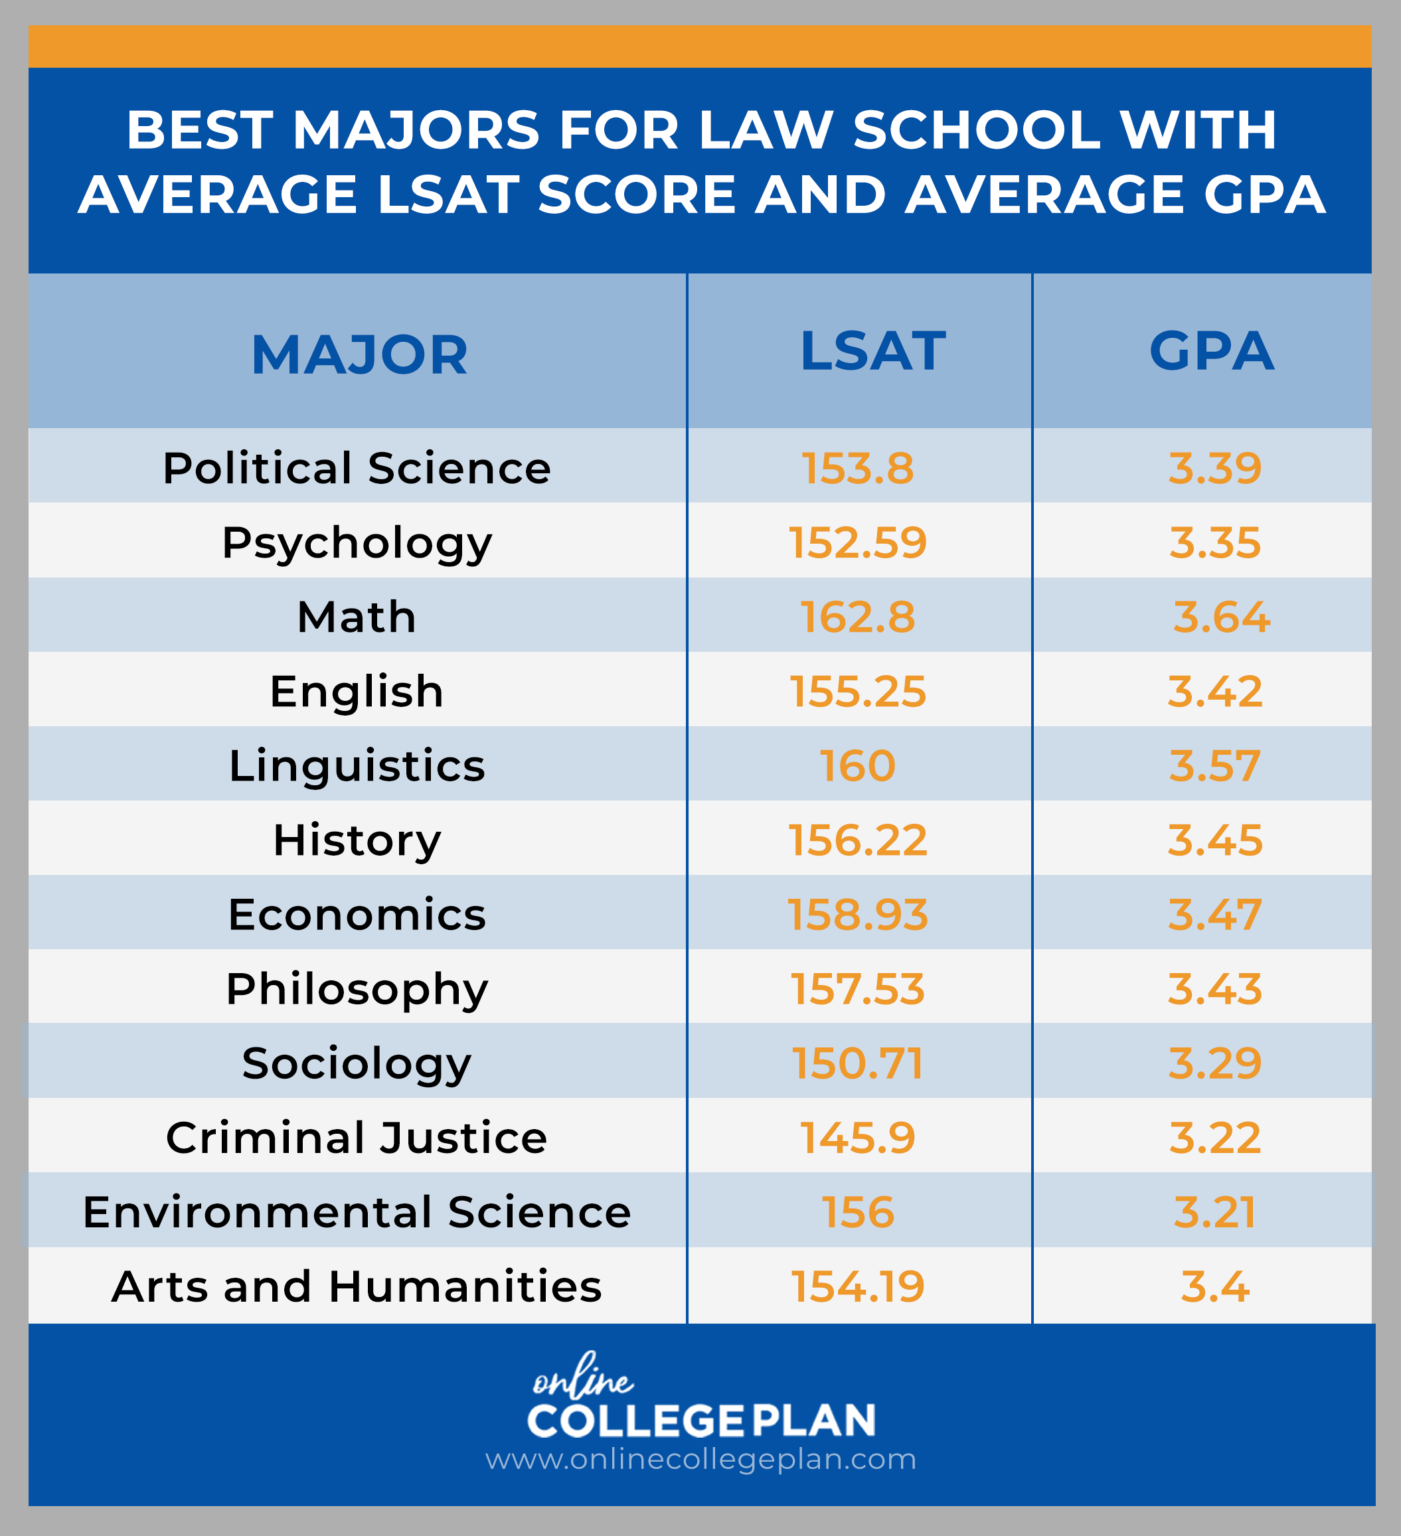 What Are the Best Majors for Students Planning to Attend Law School?